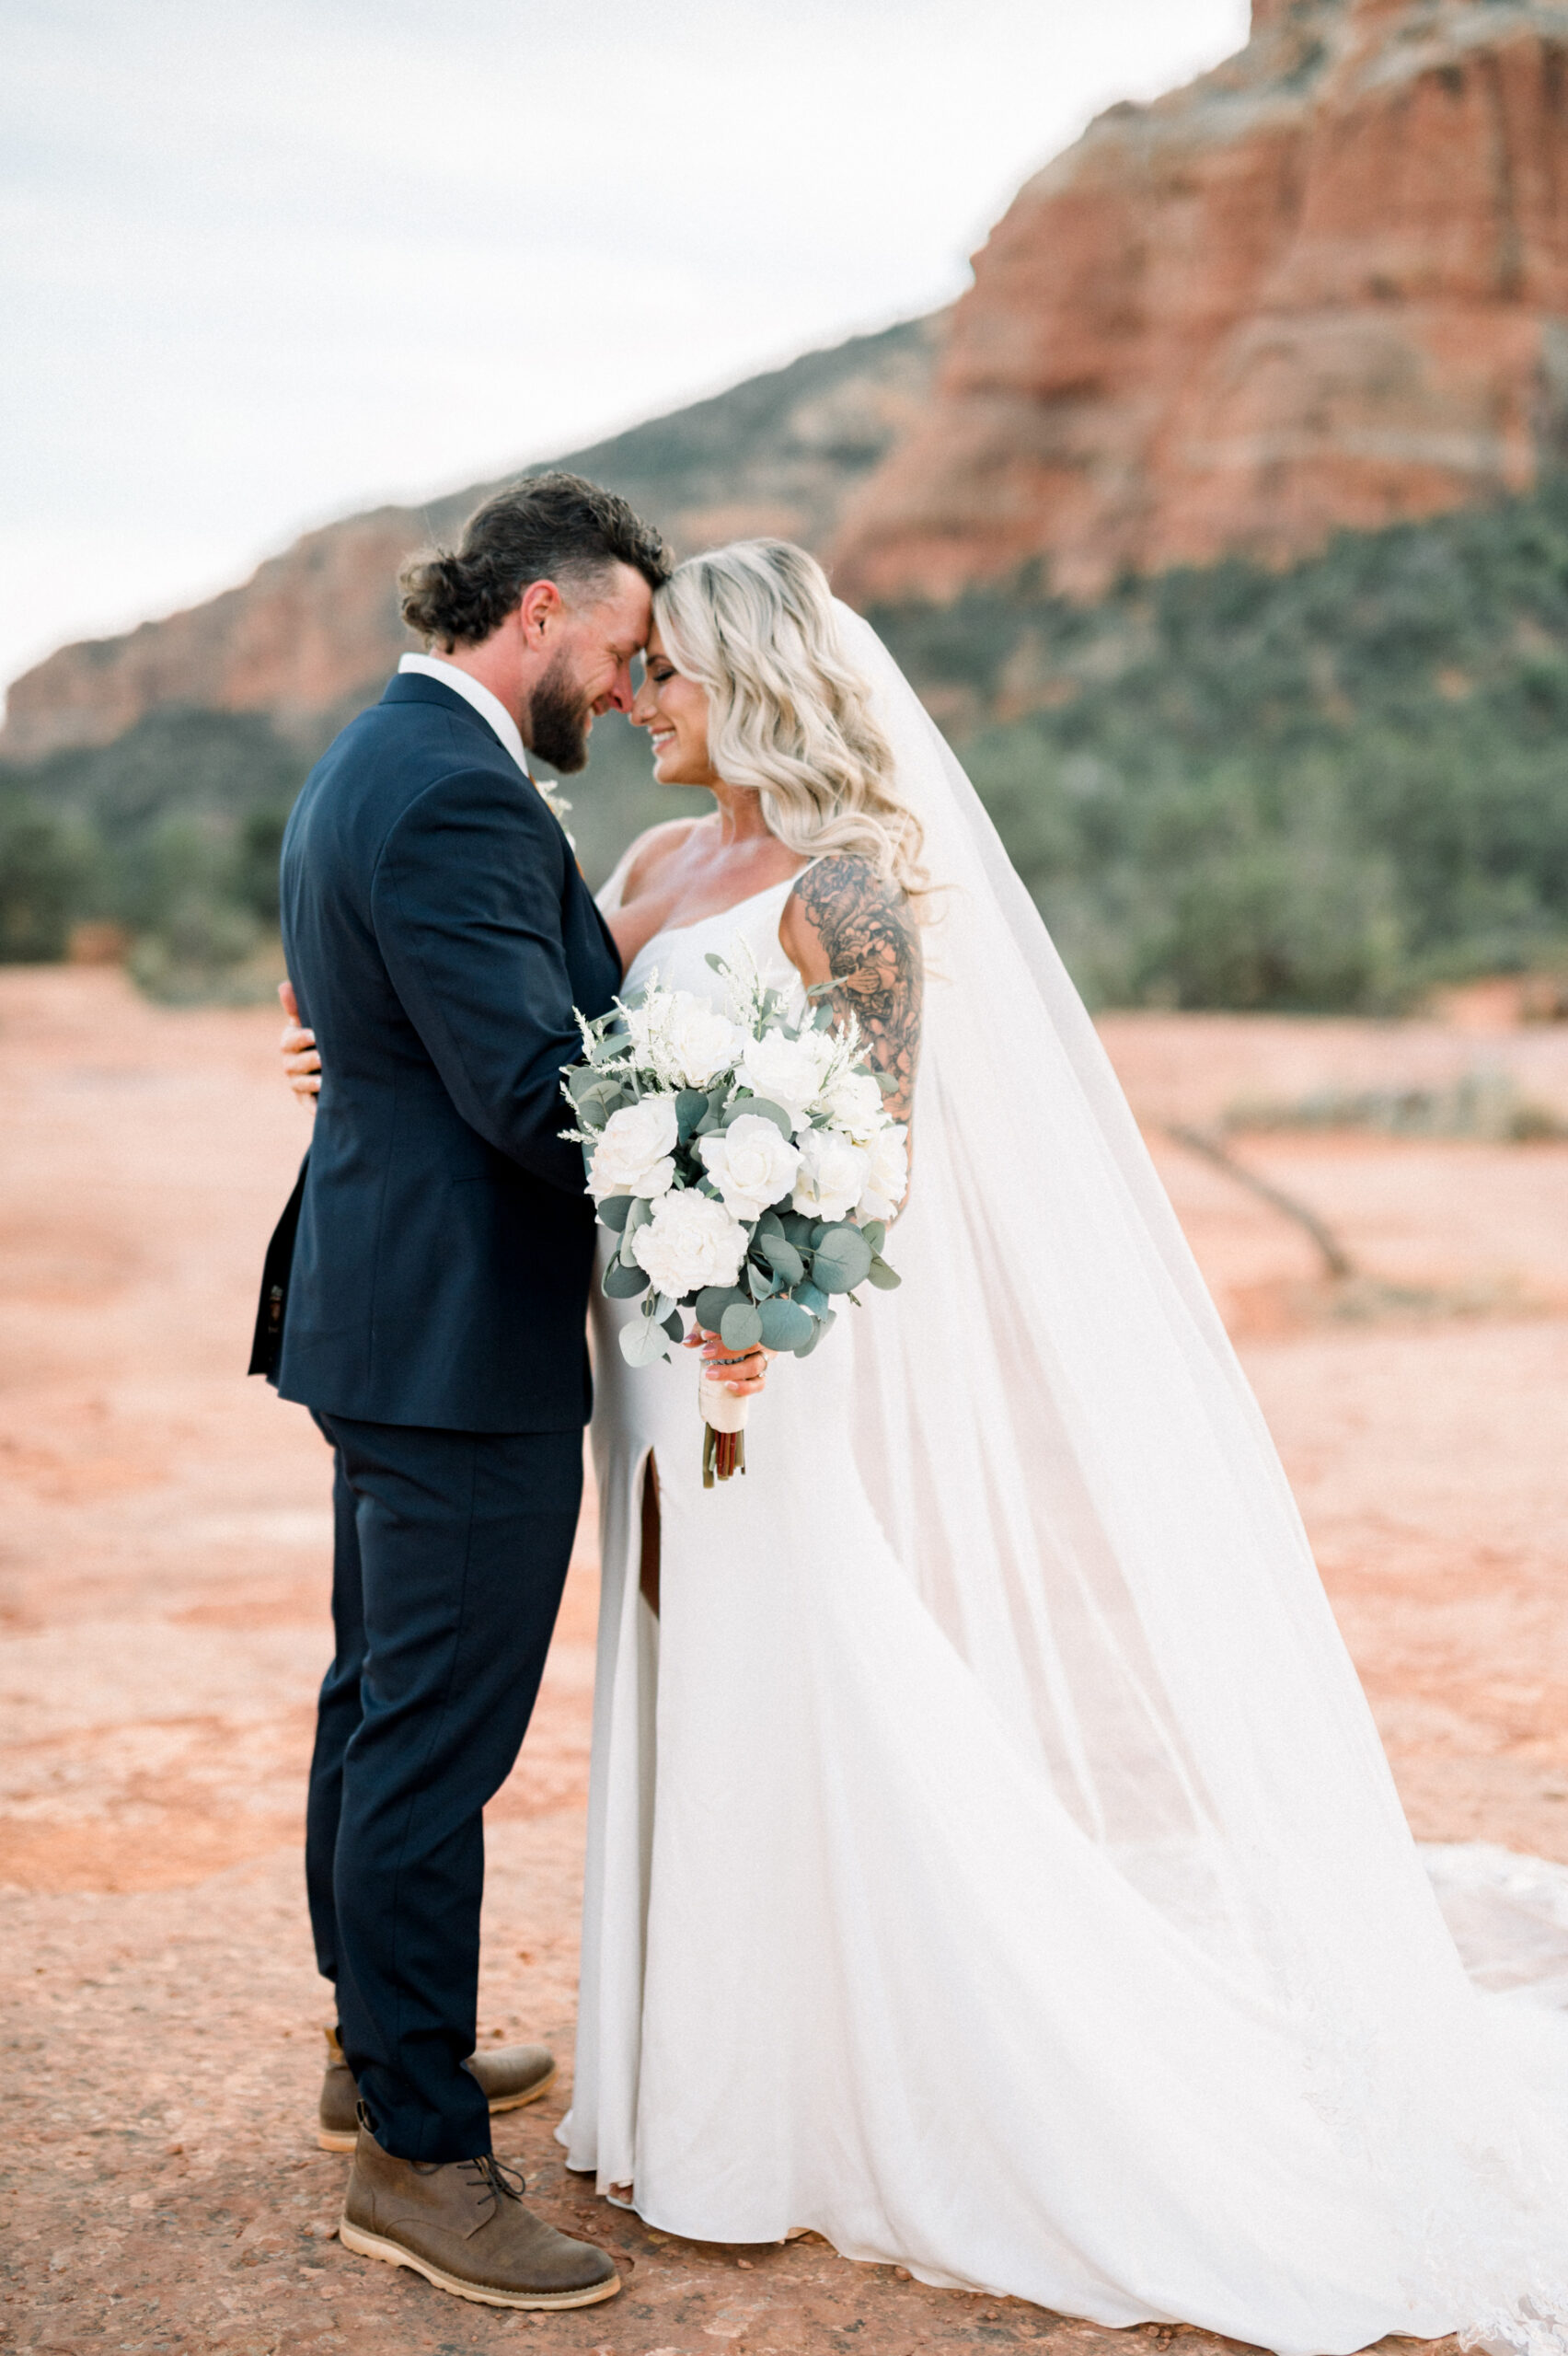 Tatum and Drake decided to get married at the beautiful Yavapi Vista for their Fall Sedona Elopement with their closest family and friends.